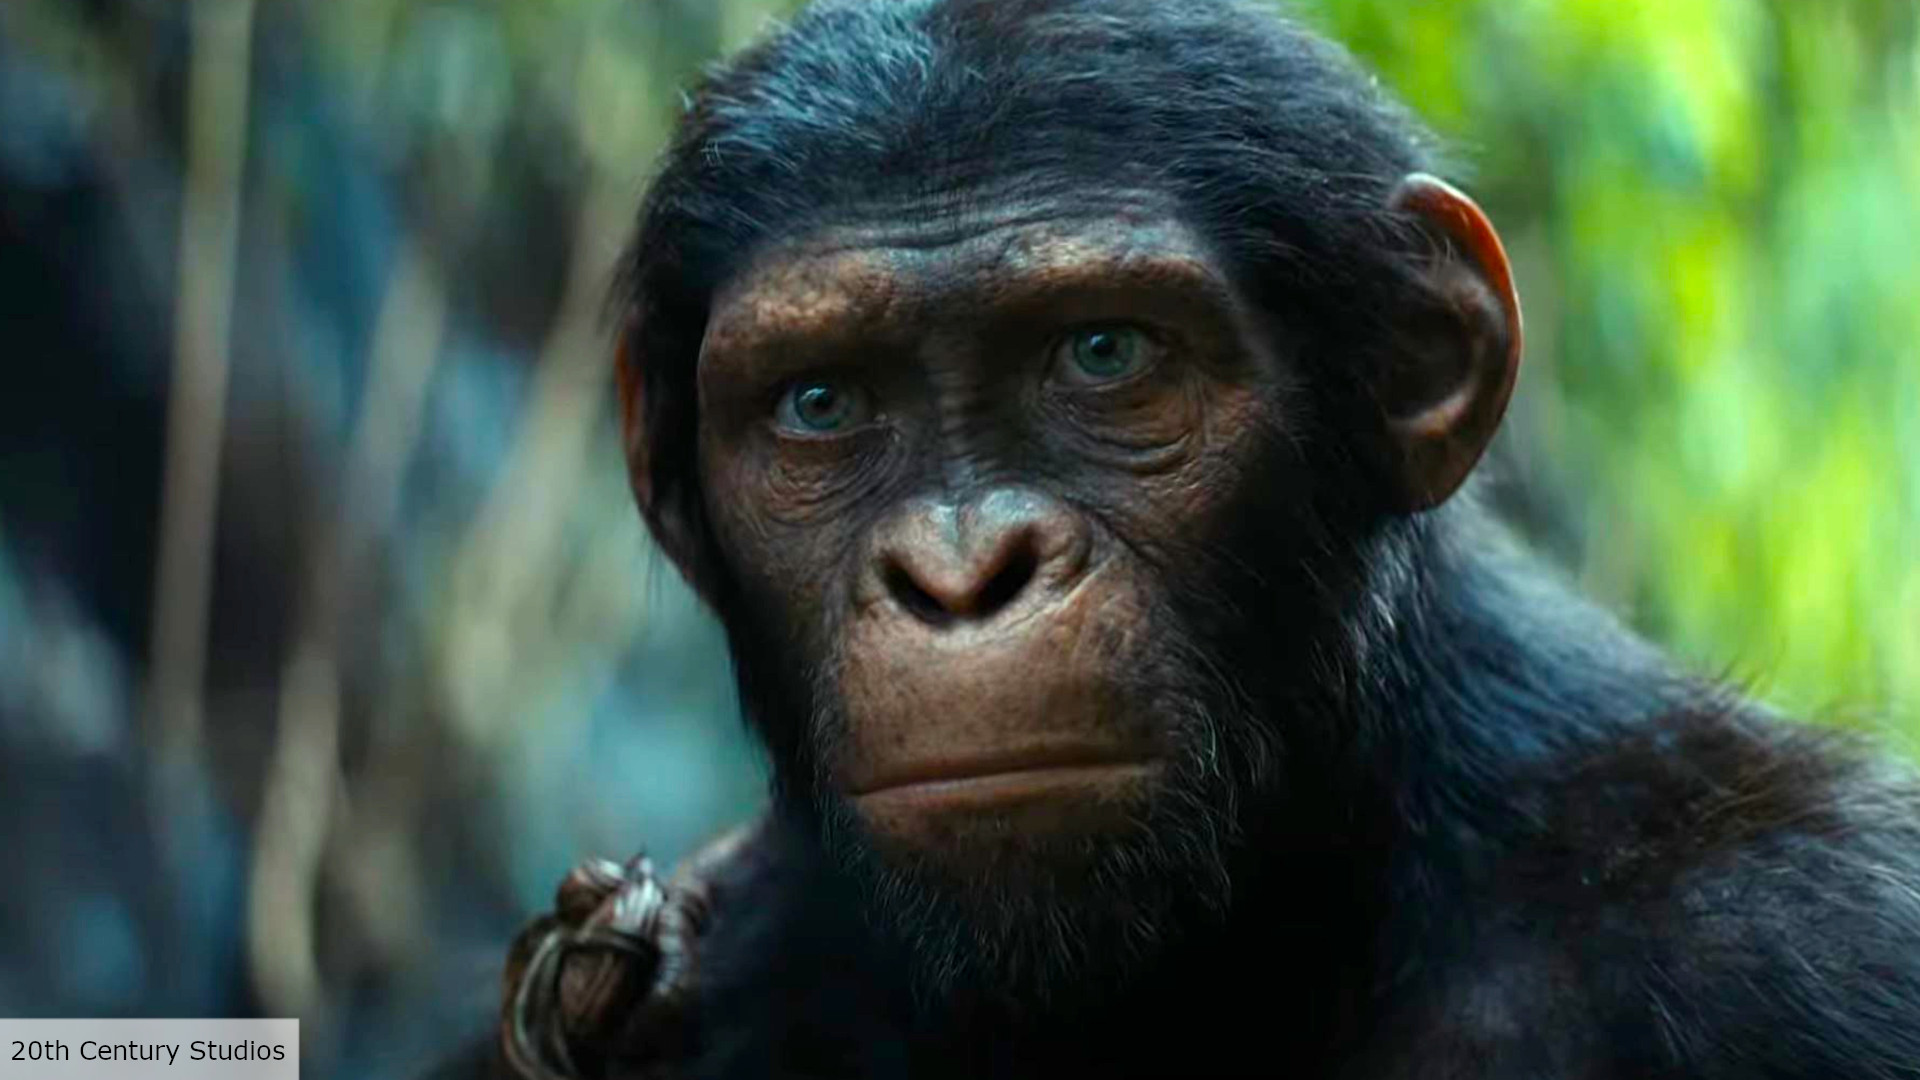 Kingdom of the of the Apes release date, cast, plot, and more